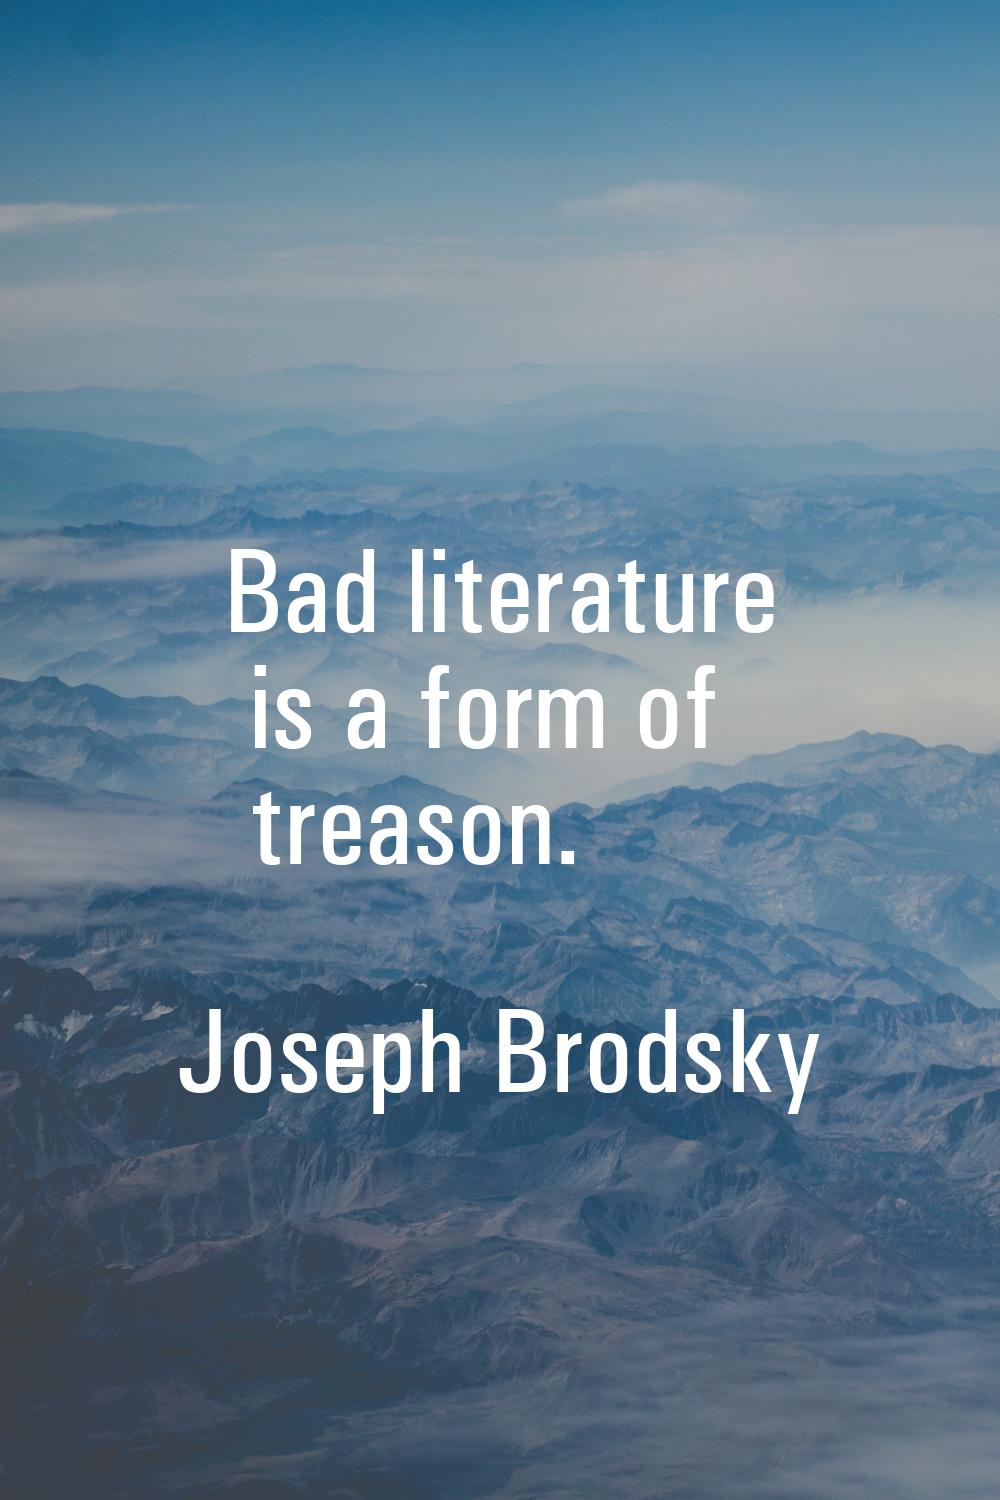 Bad literature is a form of treason.